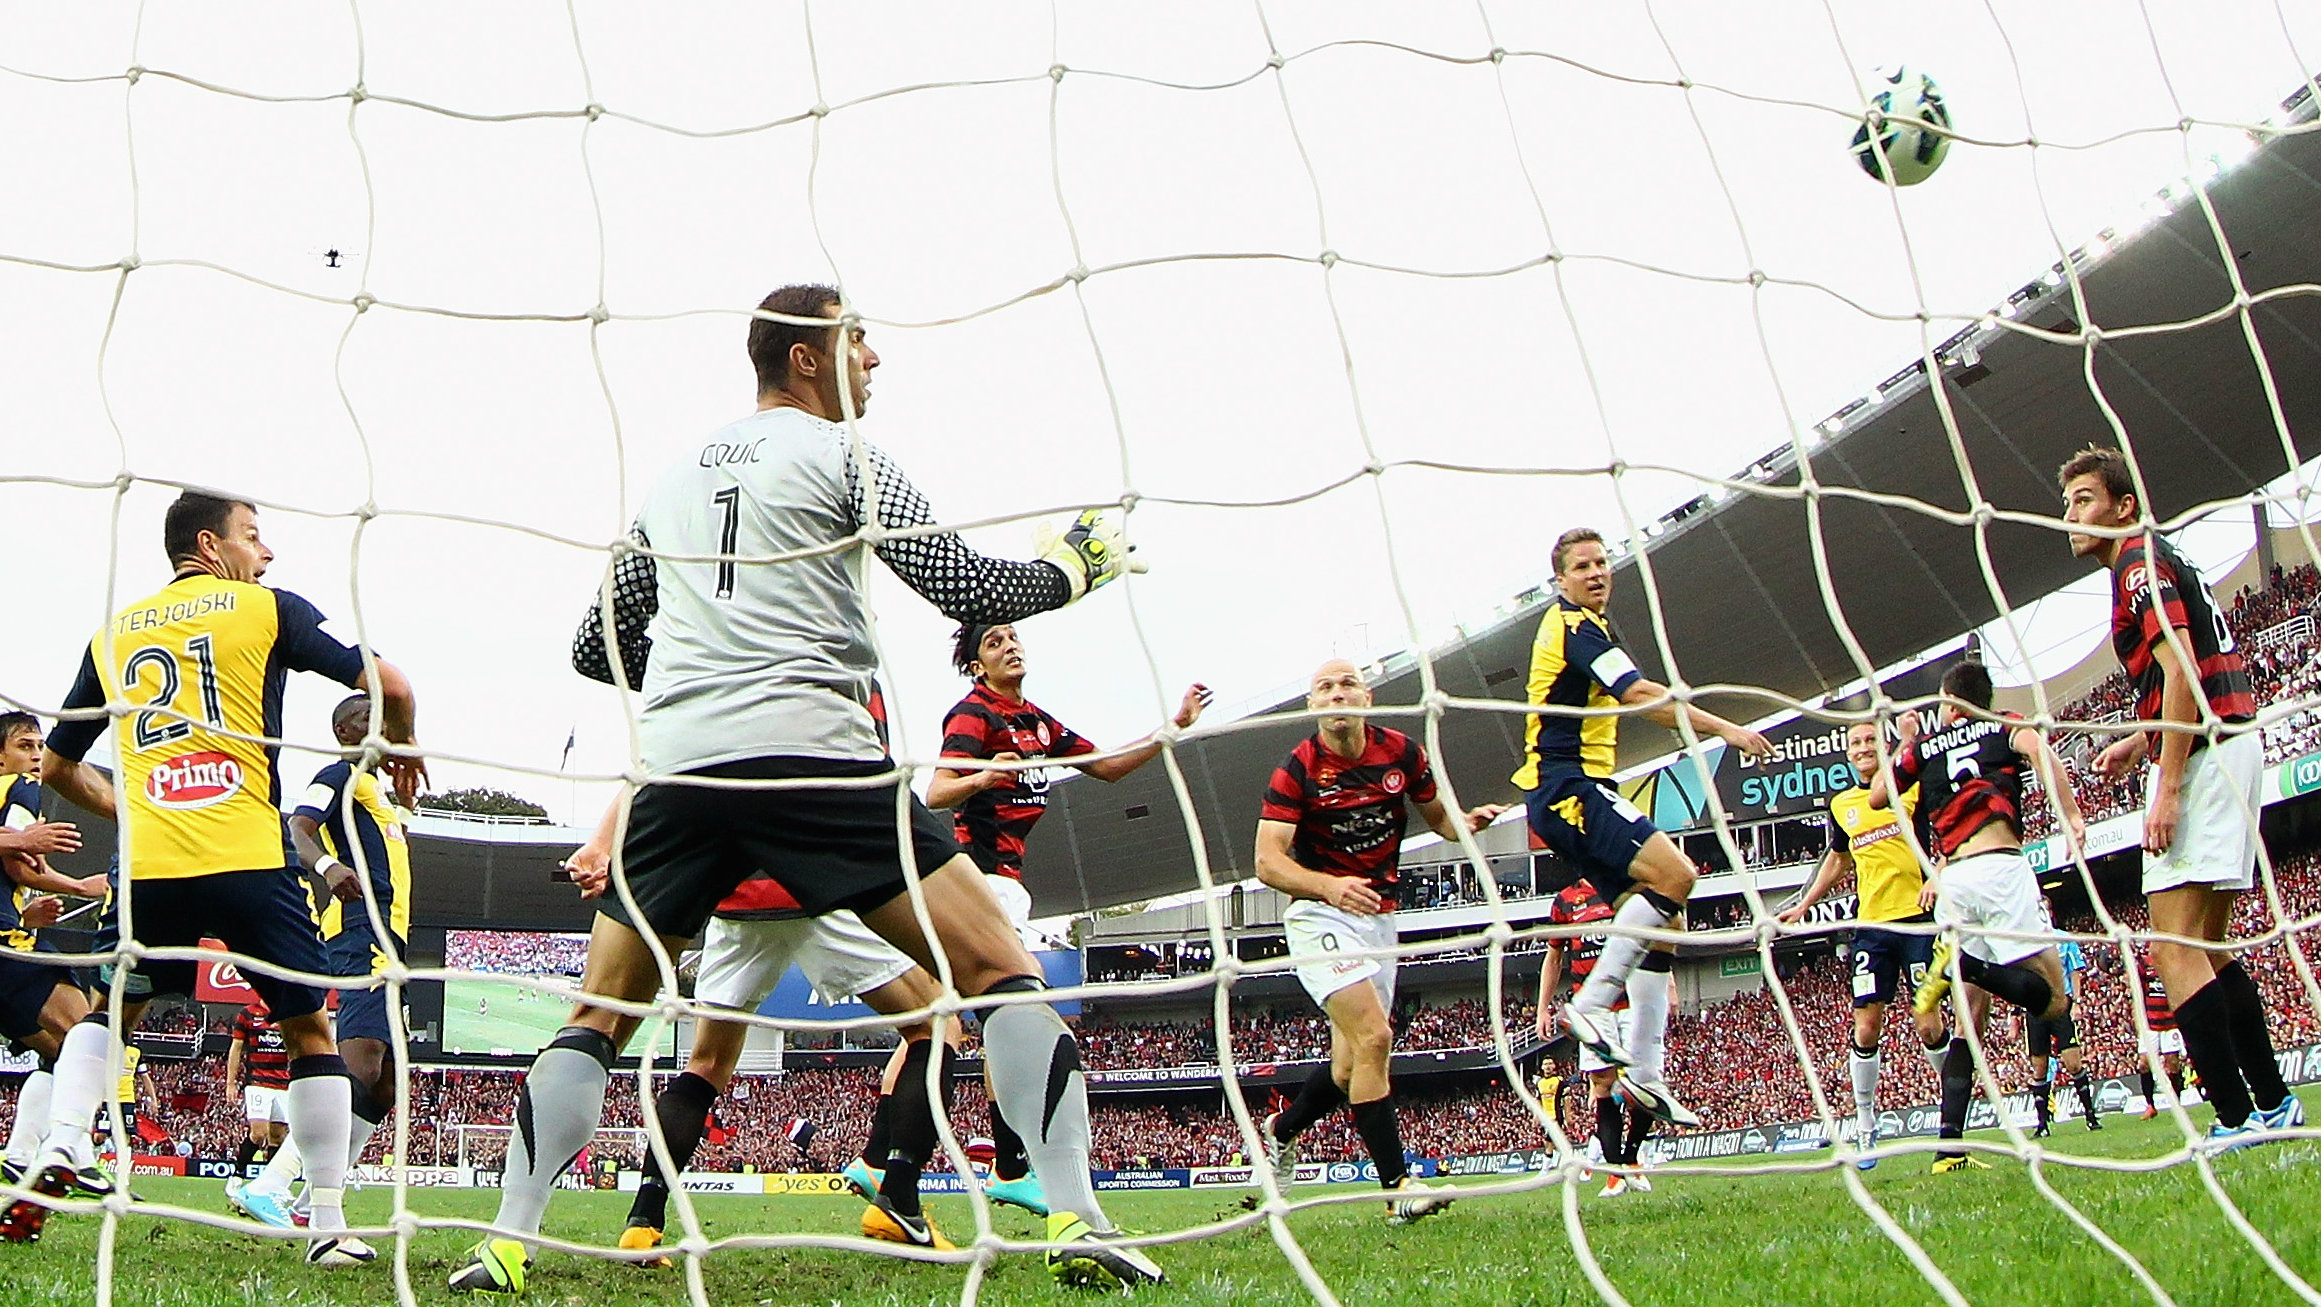 Patrick Zwaanswijk's header gave the Mariners the lead in the 2012/13 Hyundai A-League grand final.